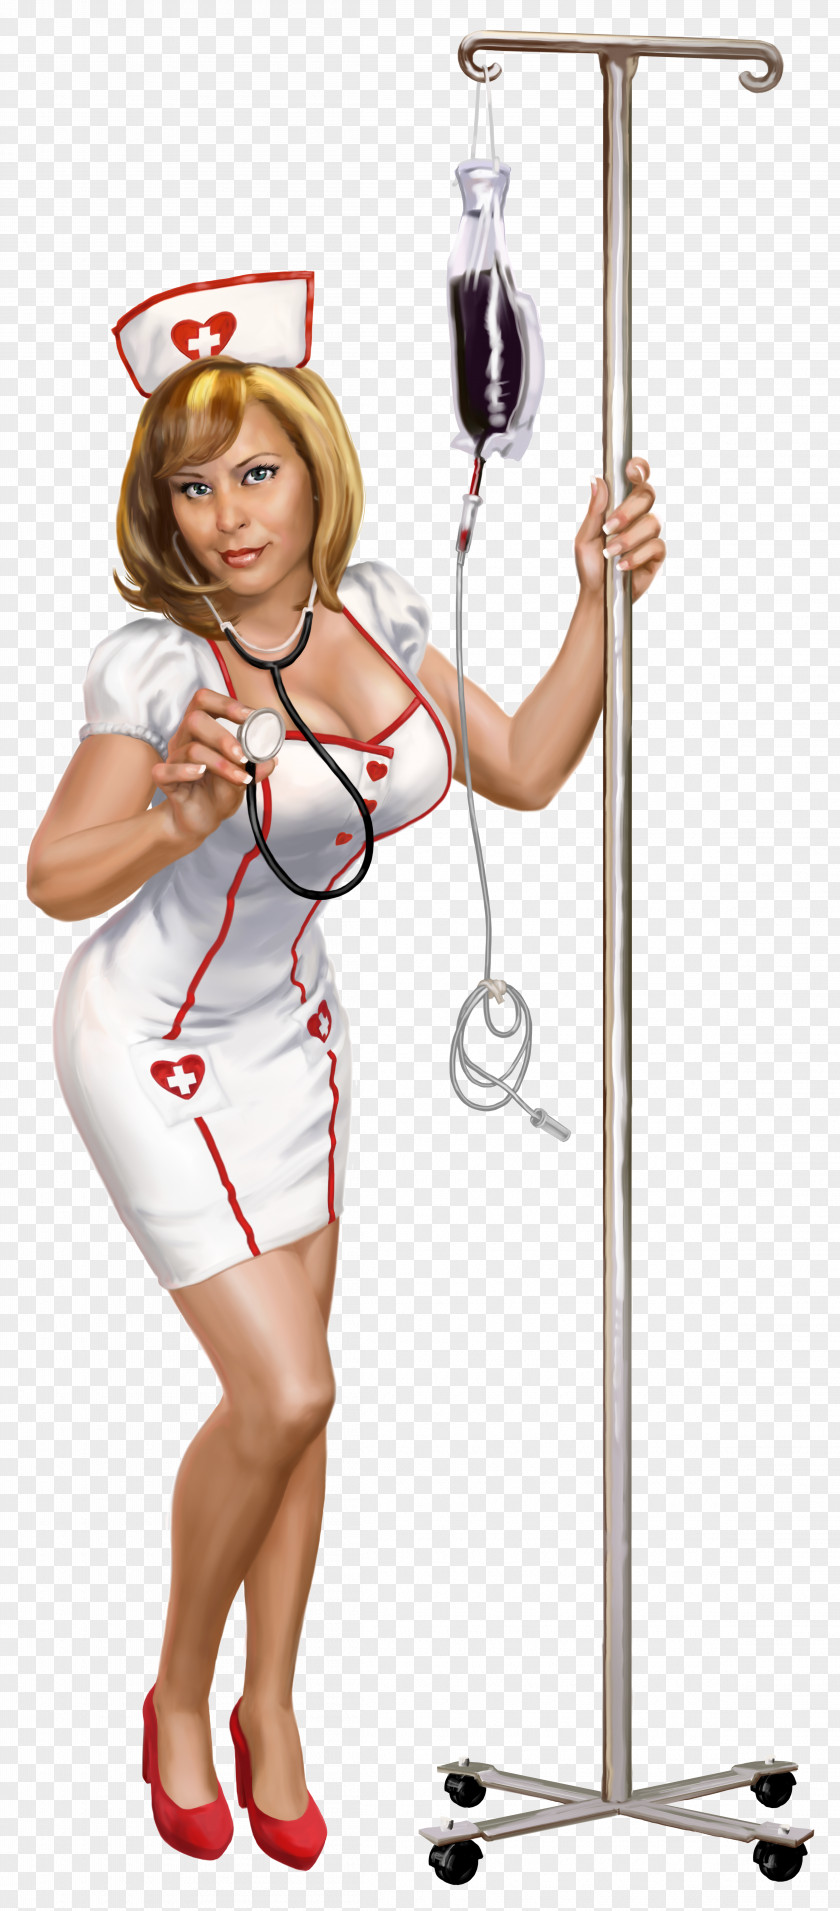 Heart Attack Grill Hamburger French Fries Restaurant Nurse PNG